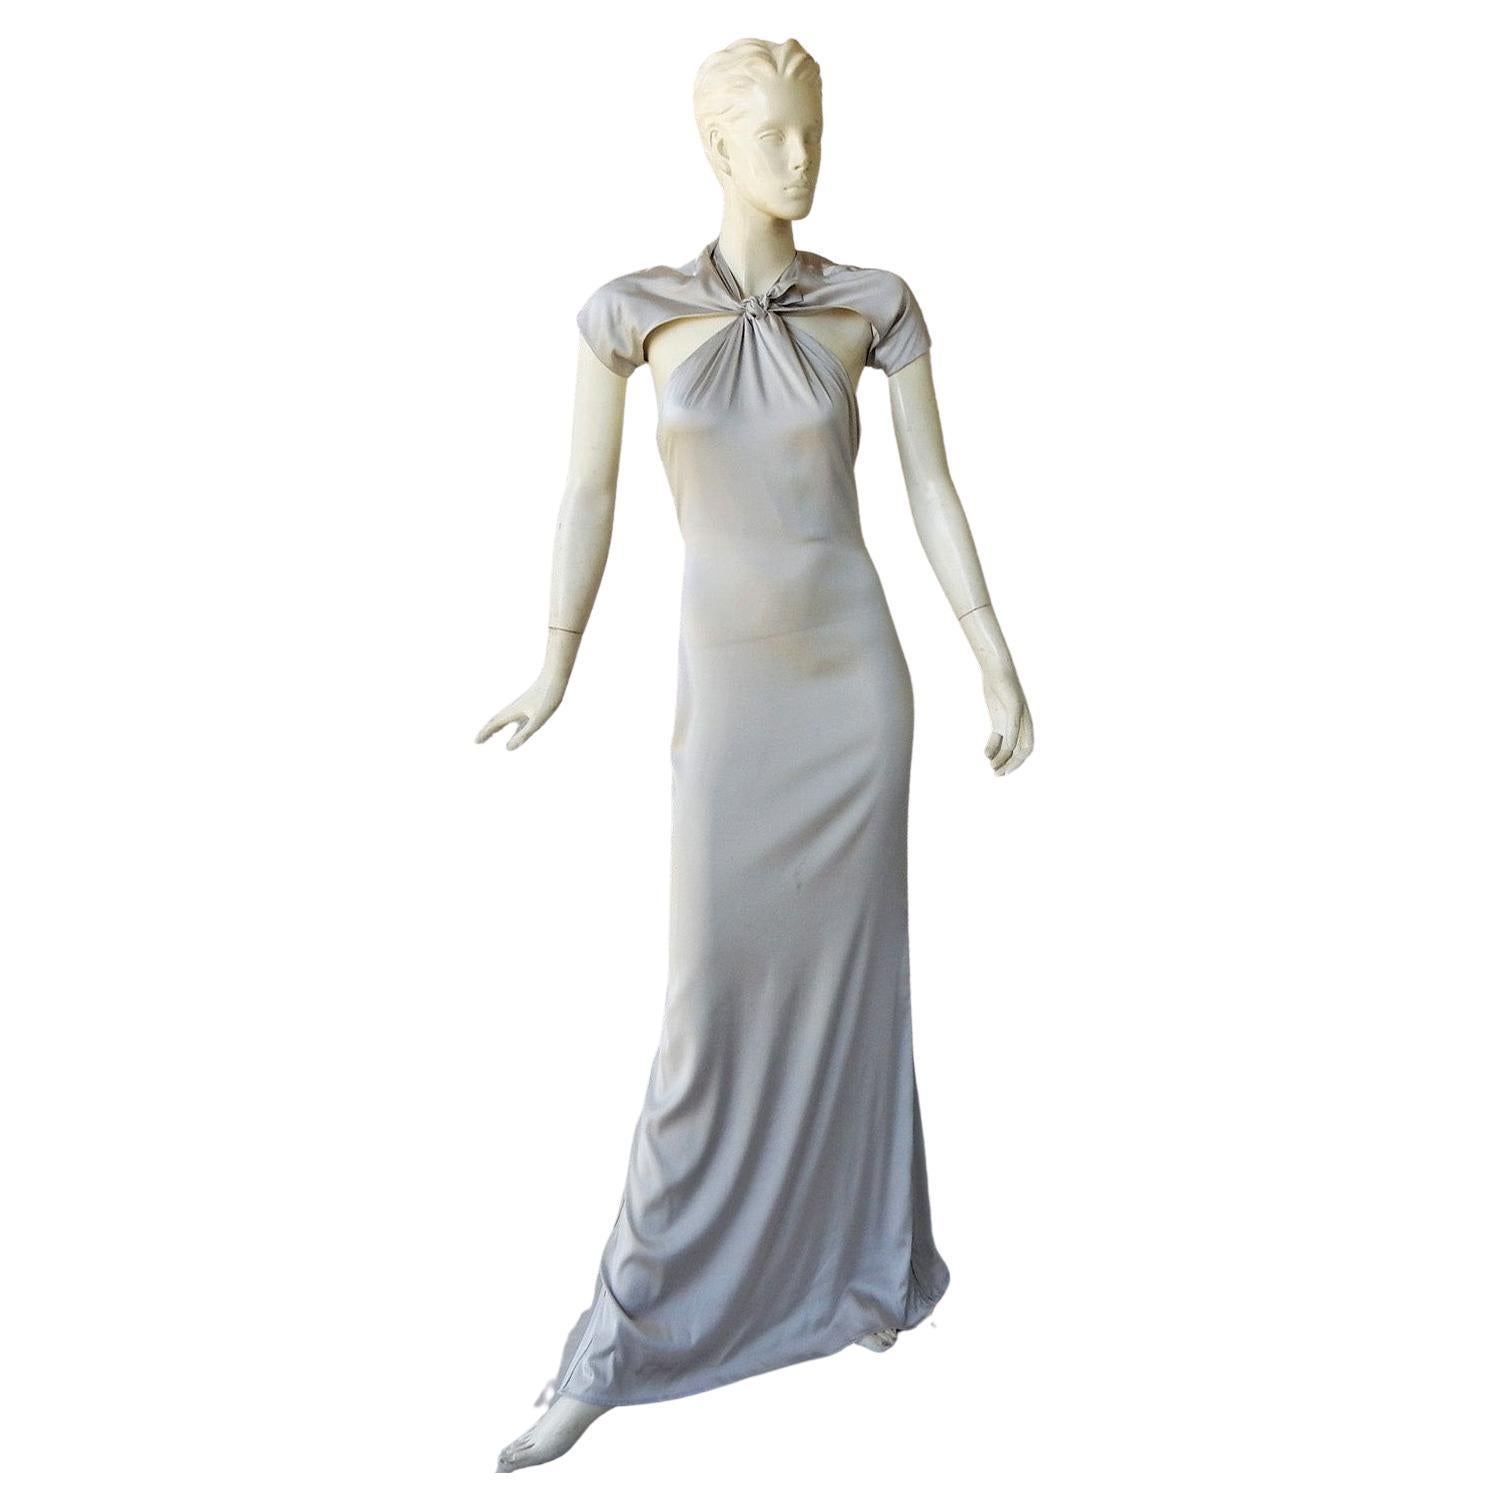 Gucci 2004 by Tom Ford Slipper Satin Silver Harlowesque Bias Cut Out Dress Gown  For Sale